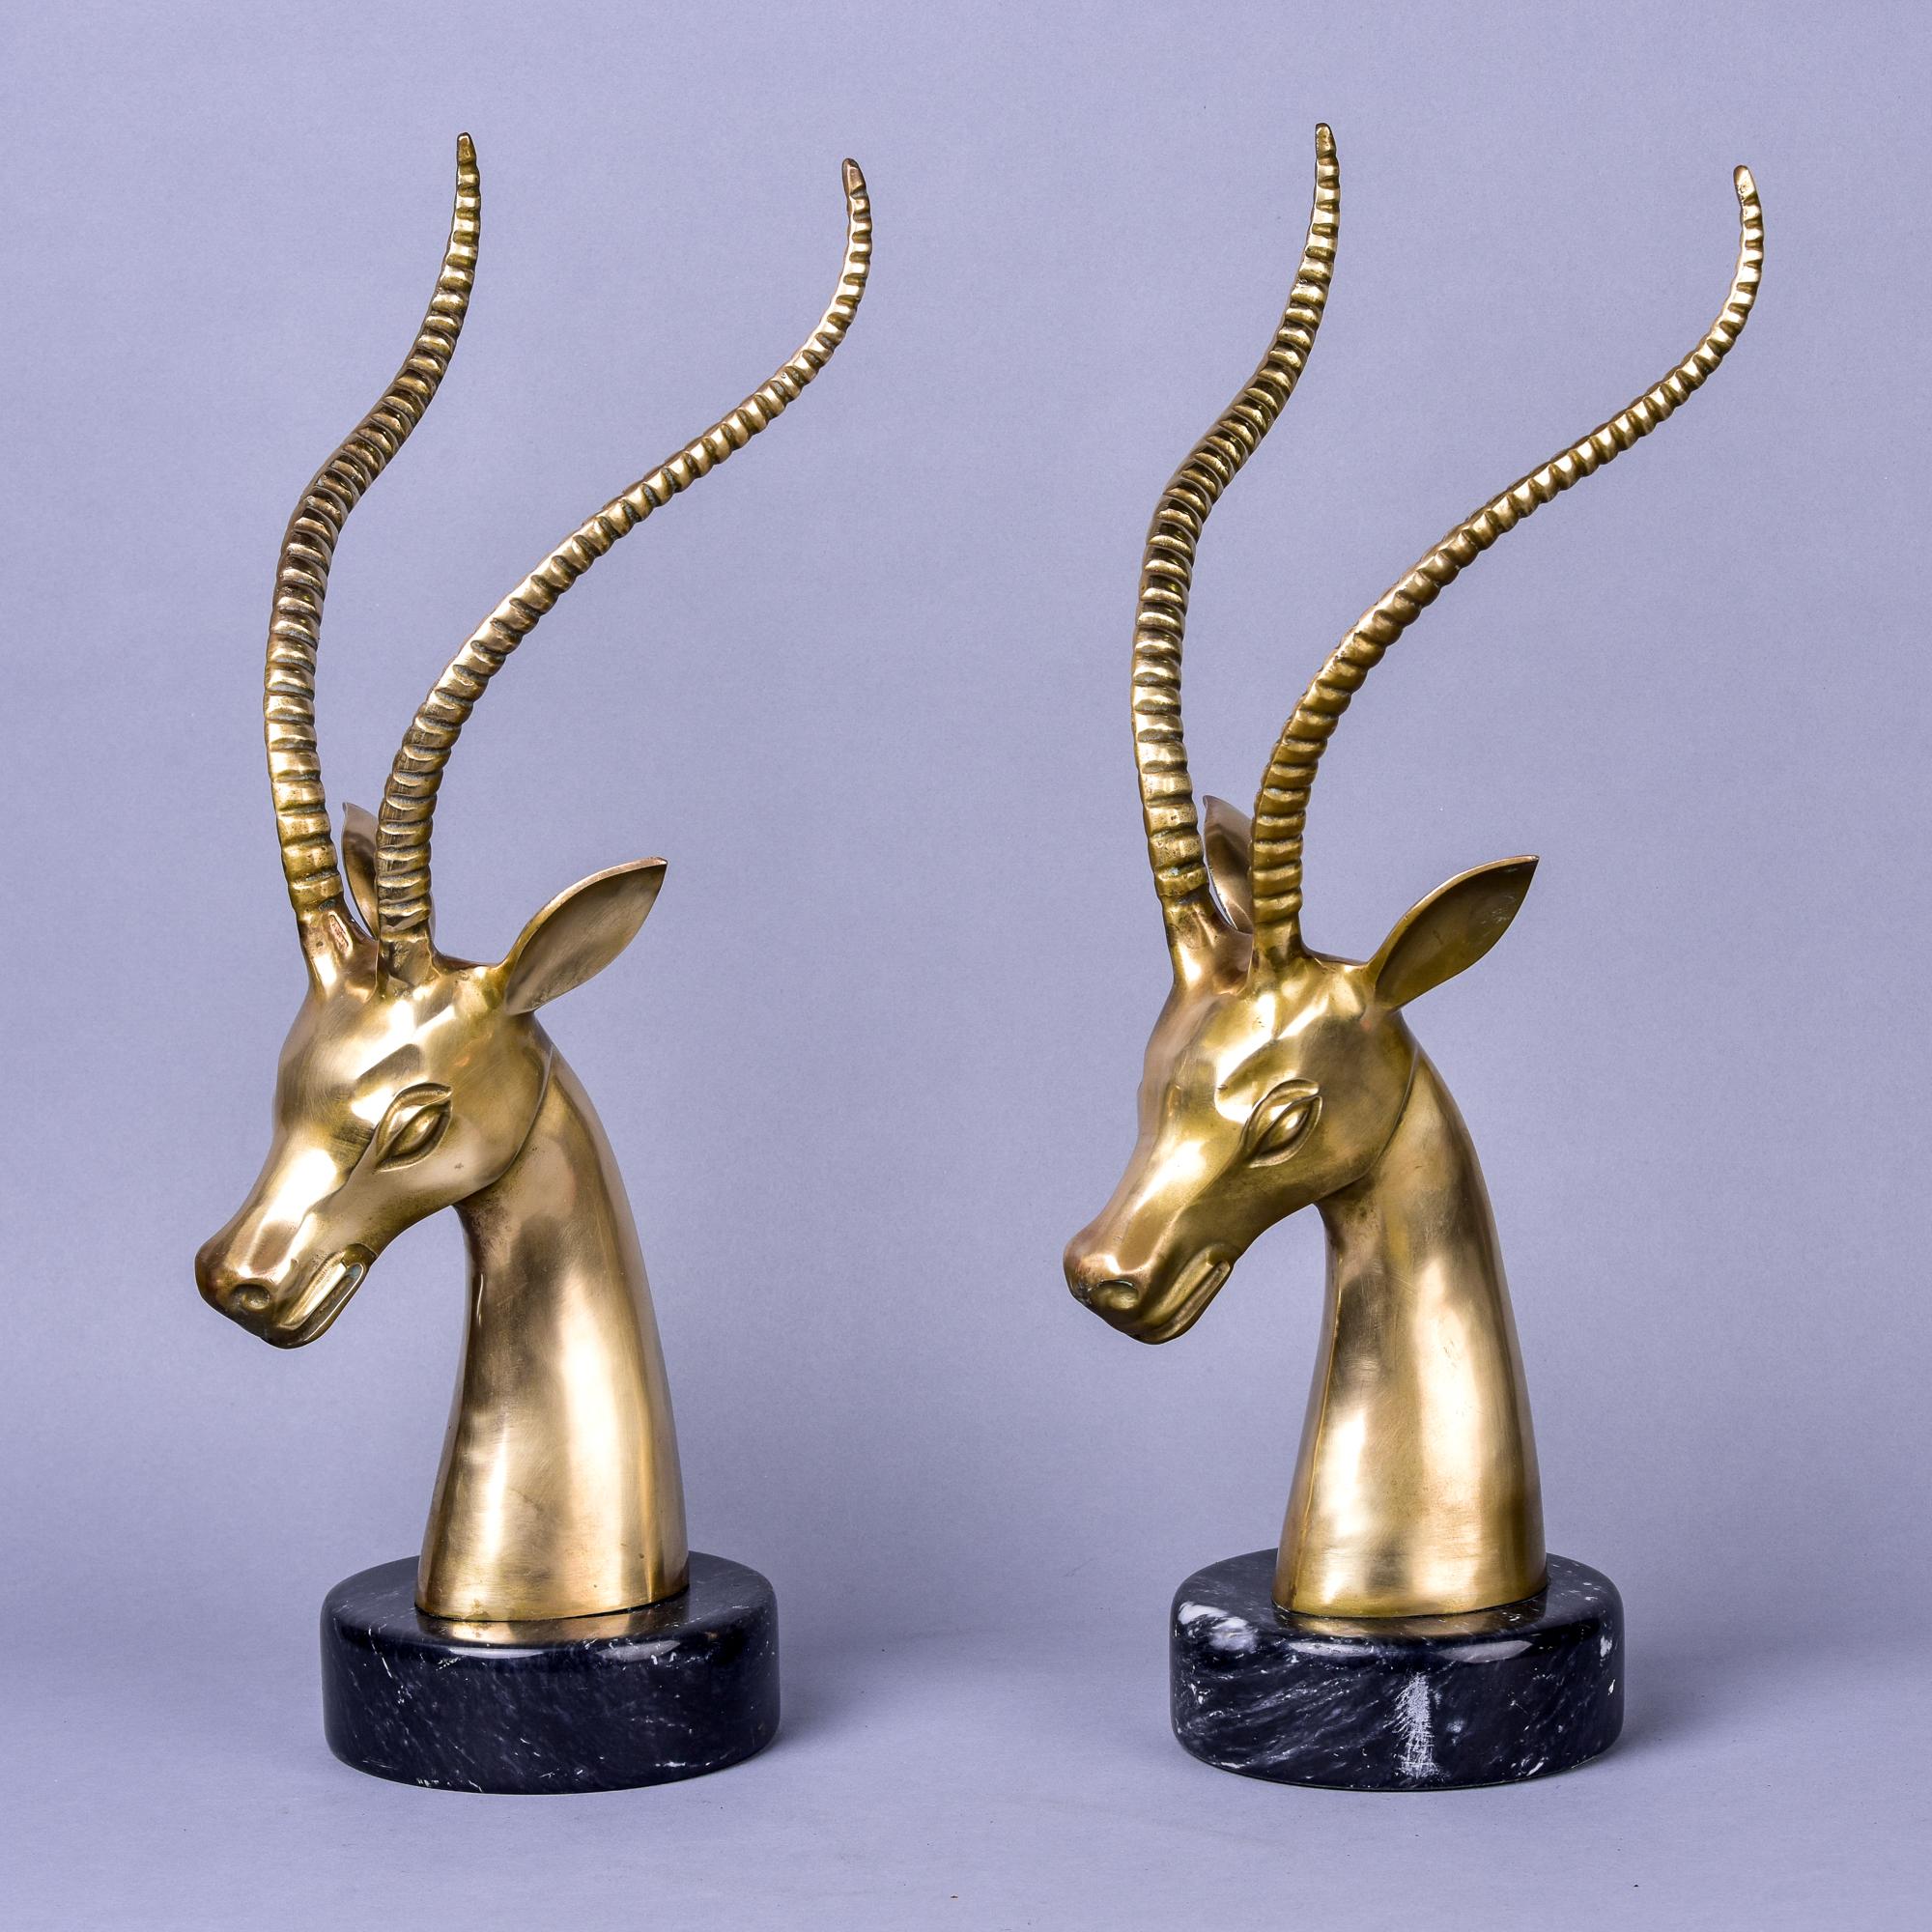 Circa 1960s pair of solid brass gazelles mounted on black marble bases. Classic mid century look. Very good vintage condition with some scattered patina/wear but no flaws found. Unknown maker. Sold and priced as a pair.